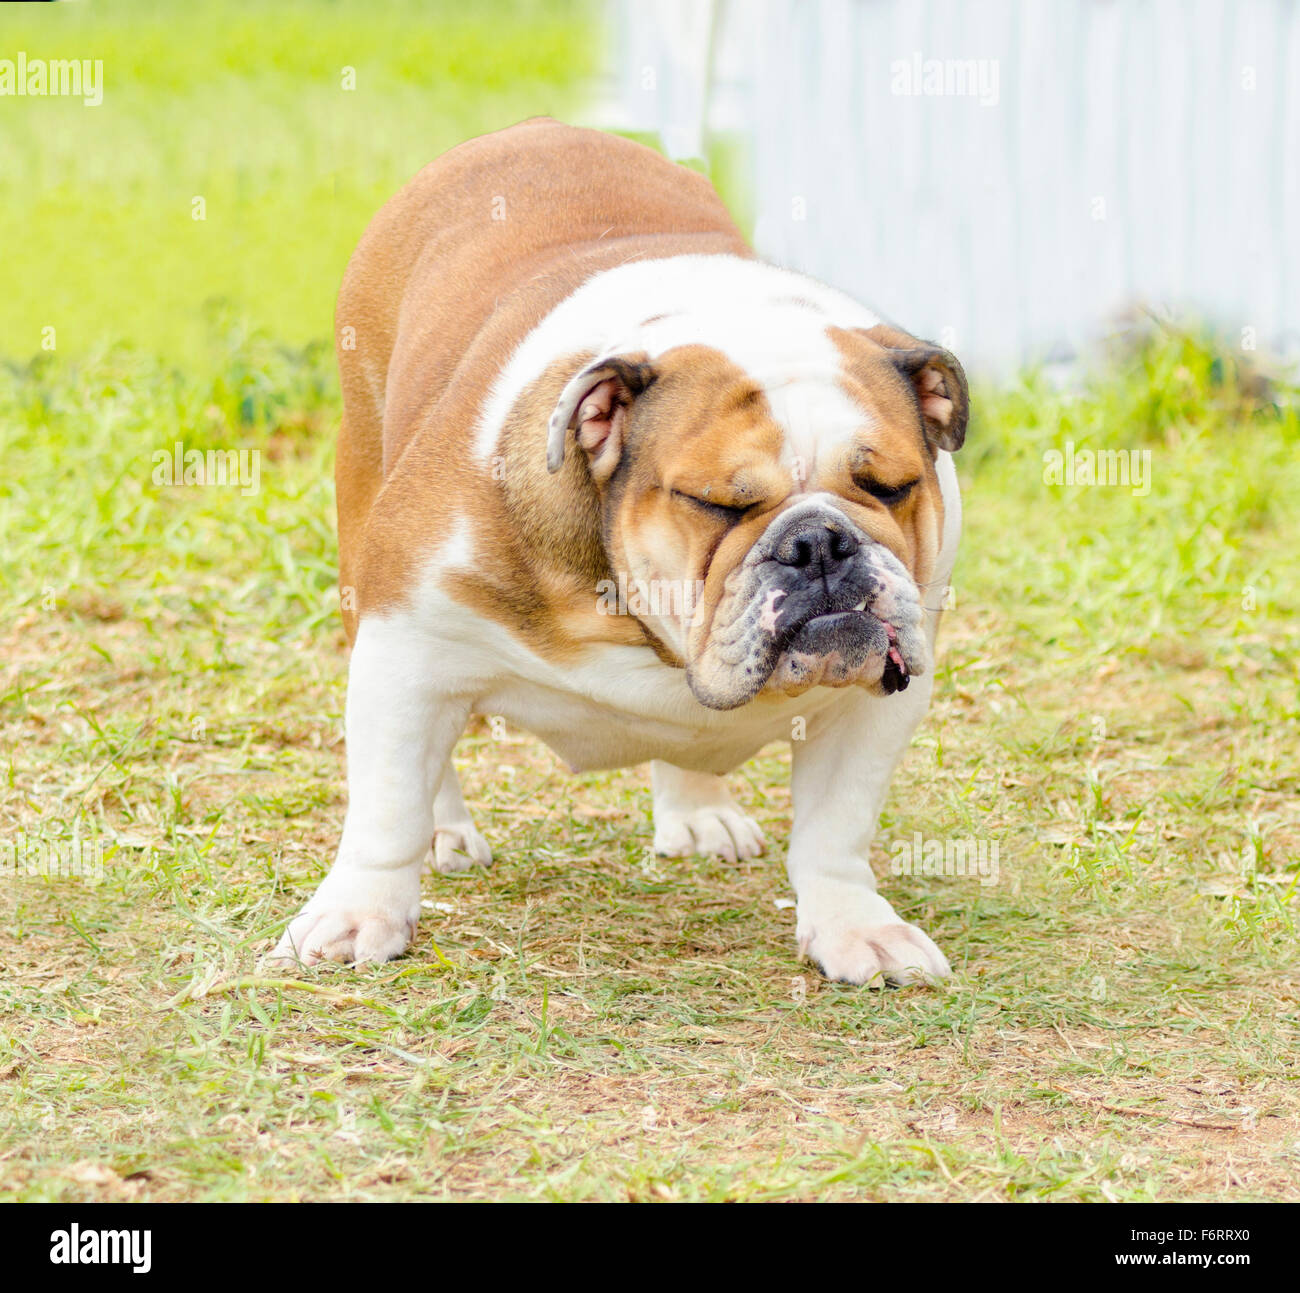 A small, young, beautiful, brown and white English Bulldog standing on the lawn whilehaving its eyes closed and looking playful Stock Photo